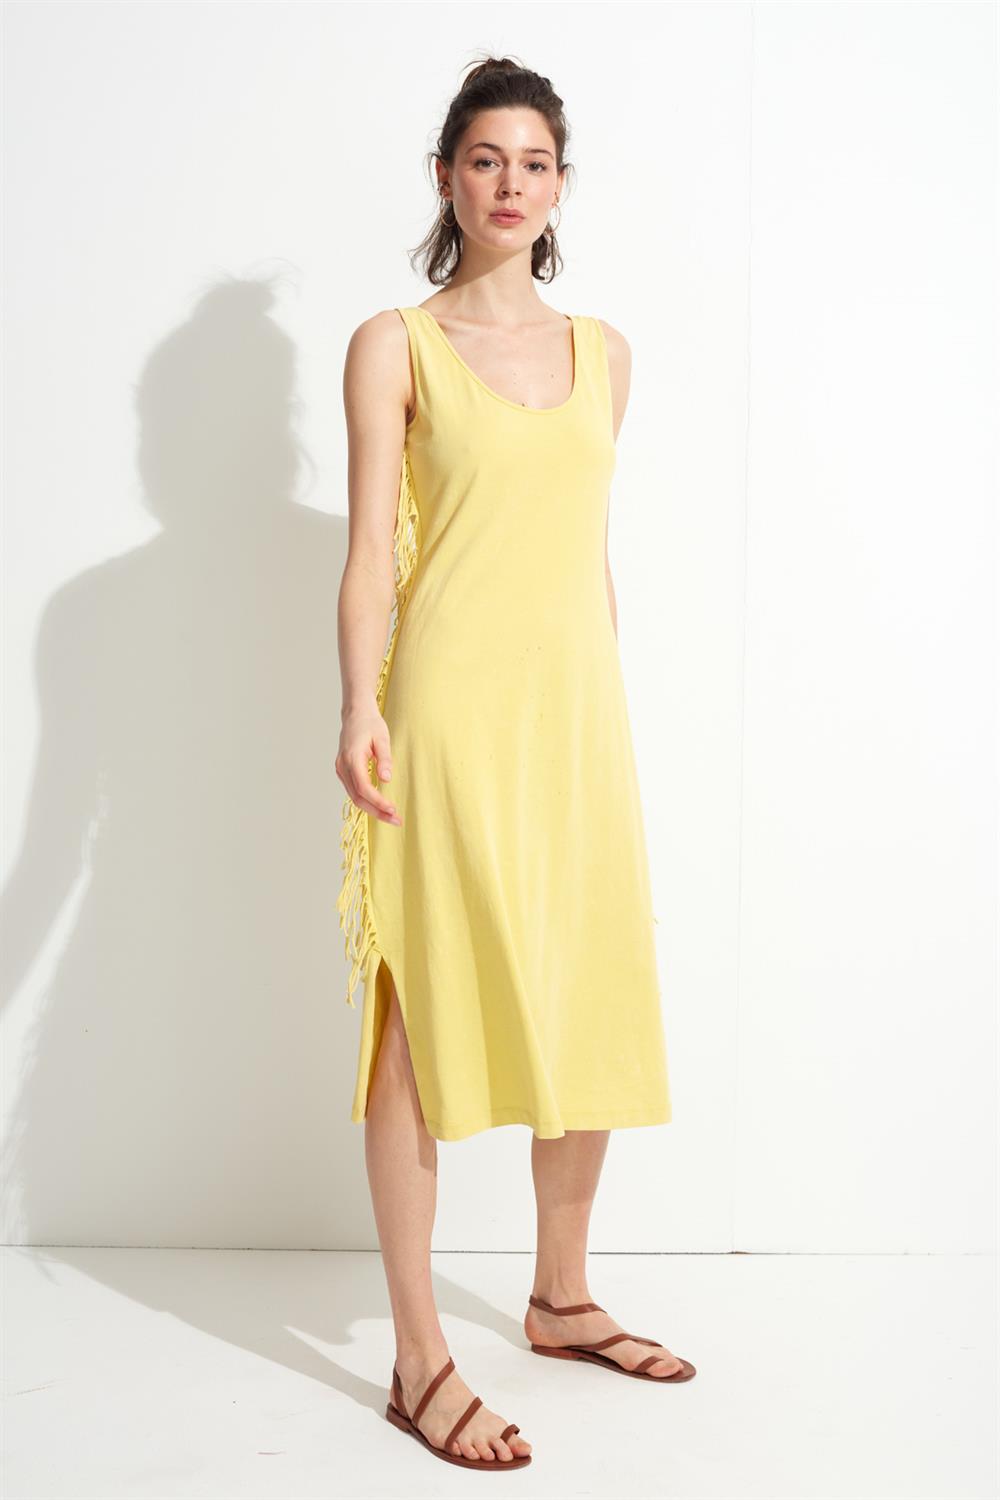 Less is More Tulum Elbise Pareo Yellow LM22508